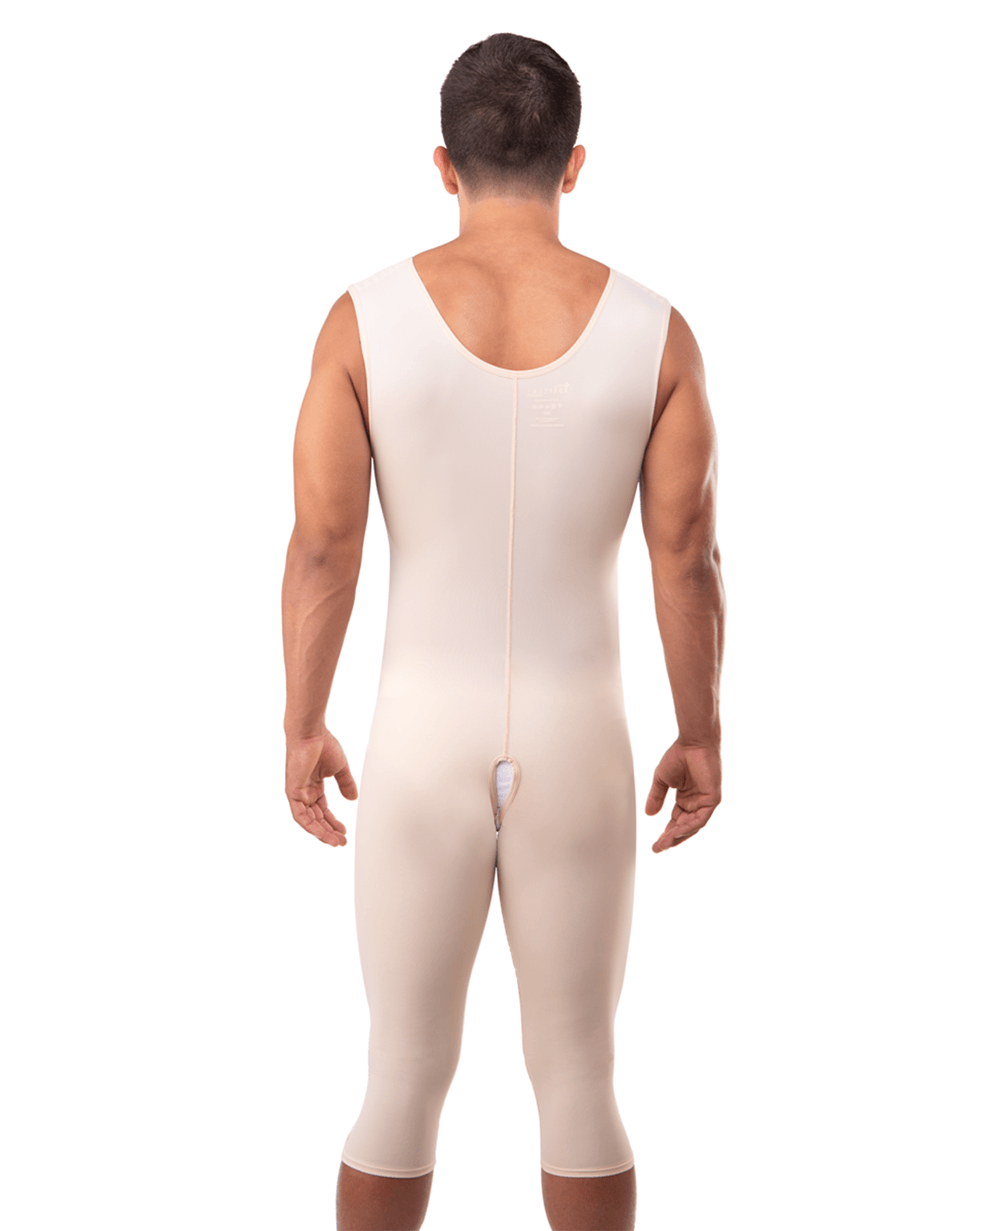 Buy Isavela 2nd Stage Body Suit Ankle Length W/Suspender Plastic